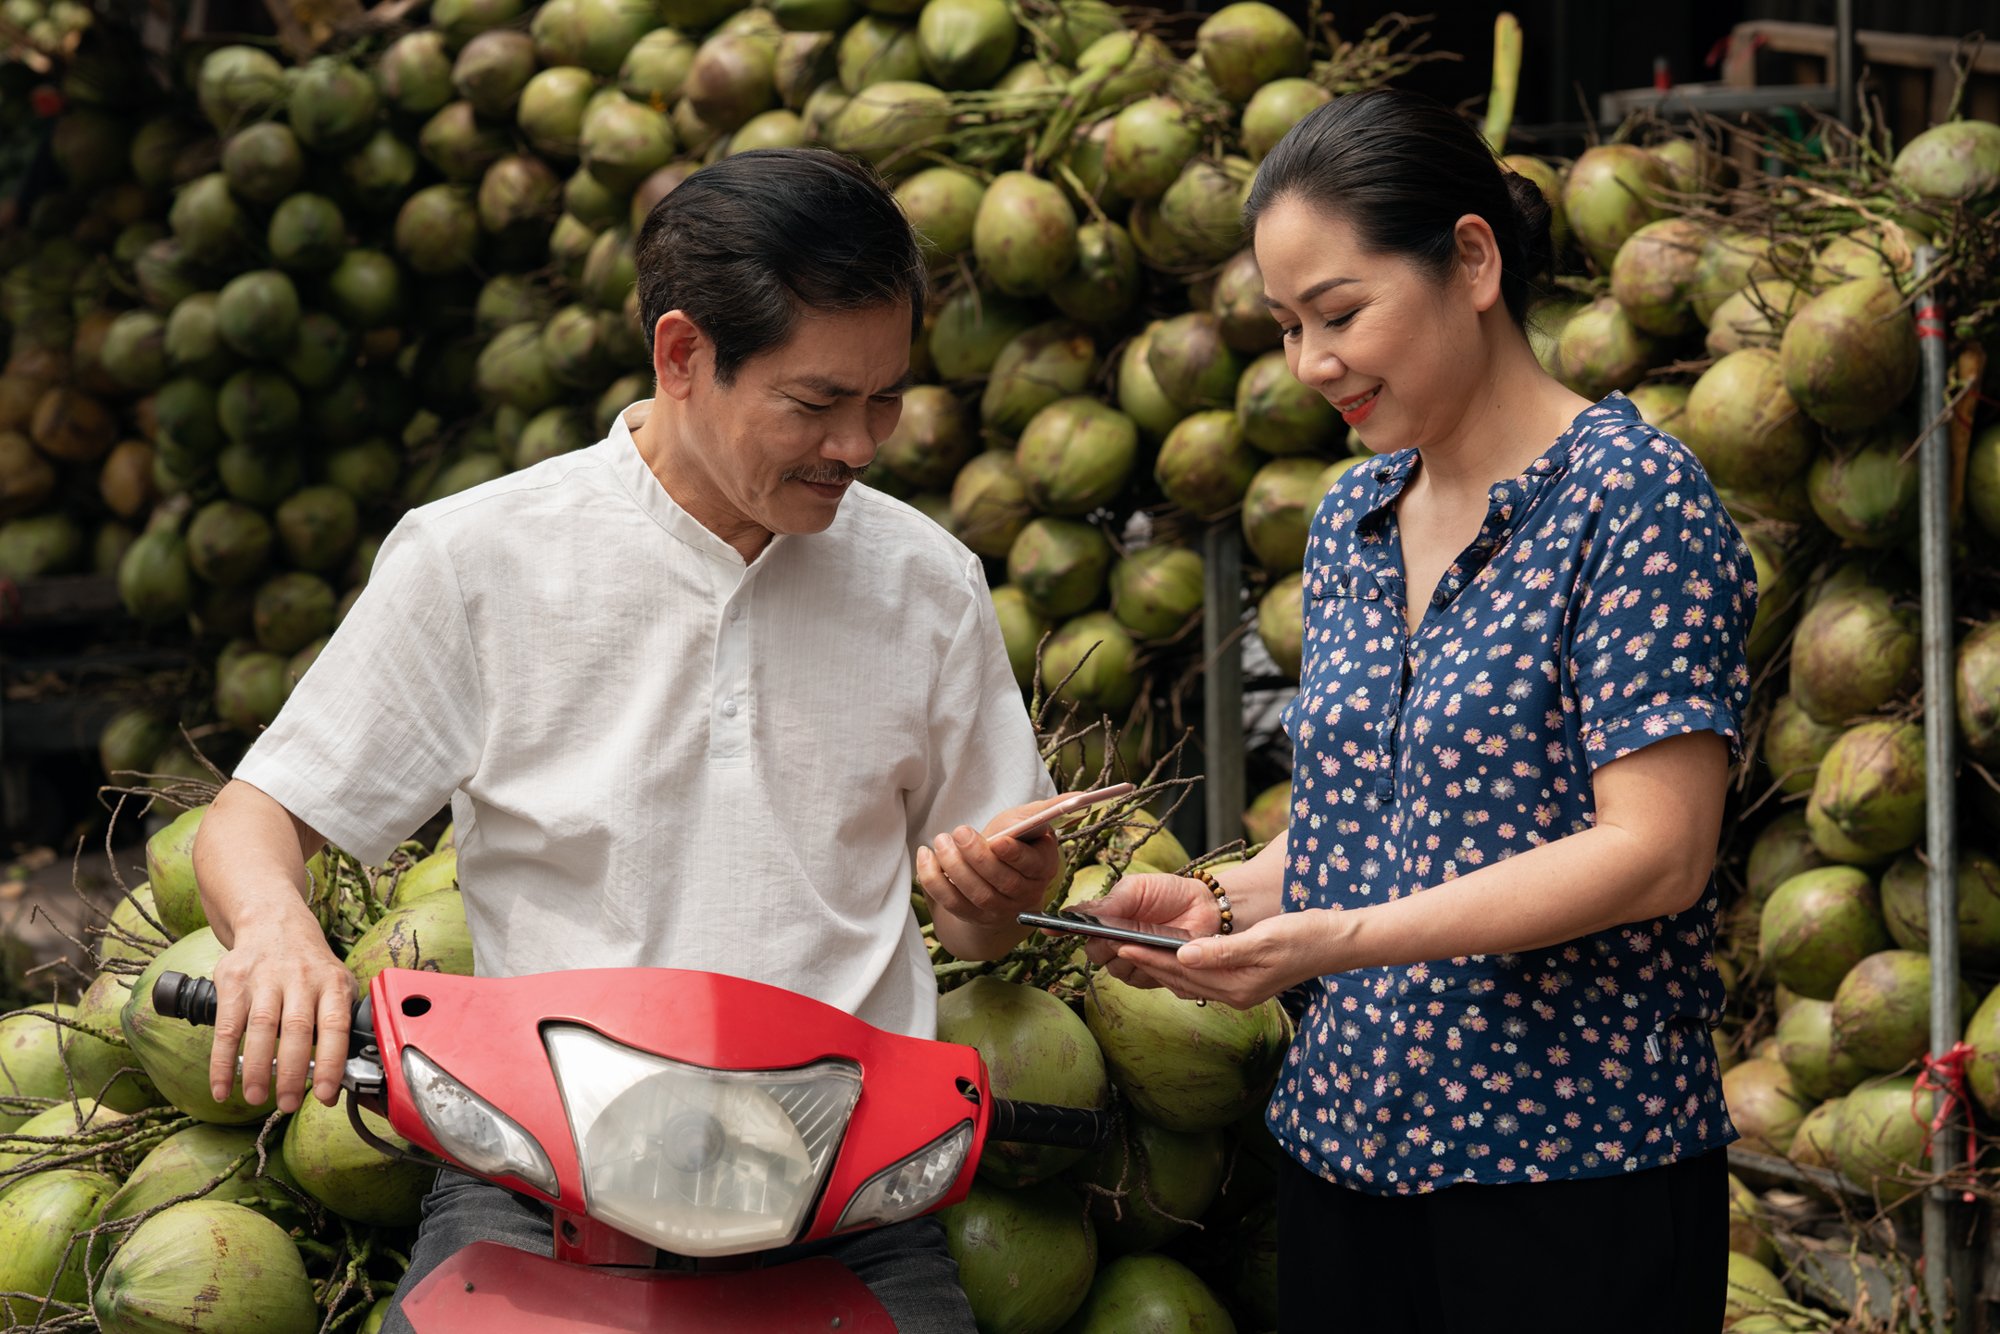  Male buyer makes payment to female seller for cocunuts with phone to phone transaction at wholsale market. 